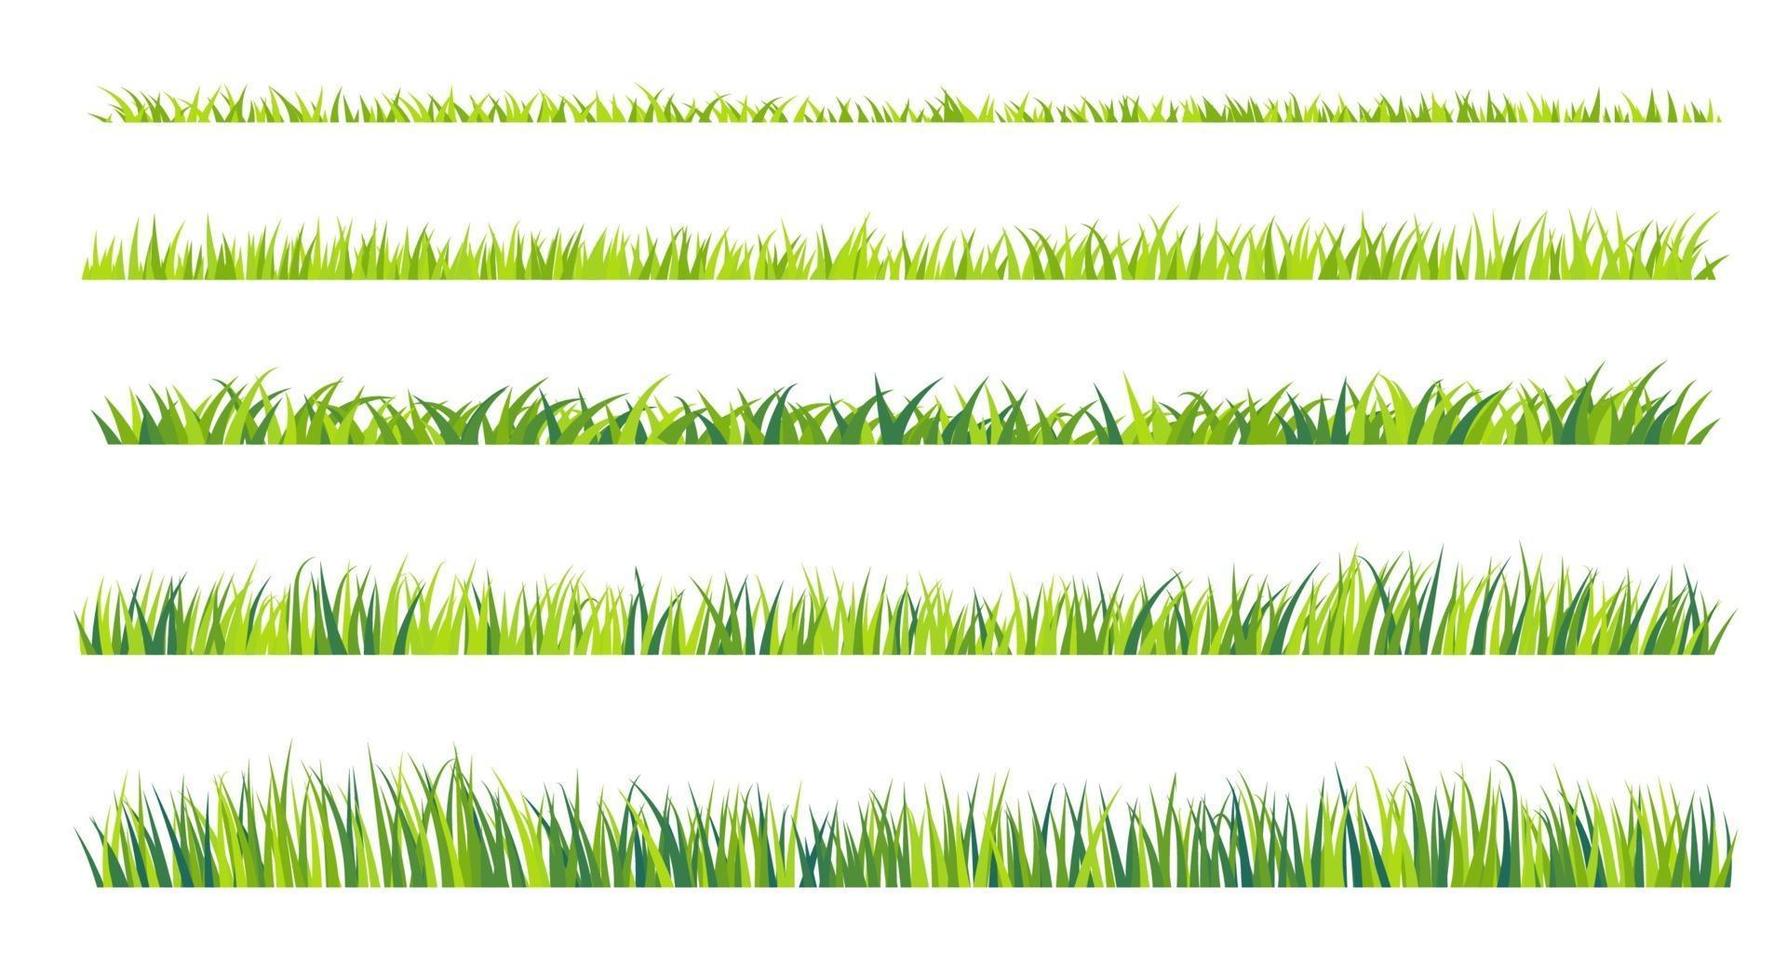 Grassland border vector pattern. Green lawn in spring. The concept of caring for the global ecosystem